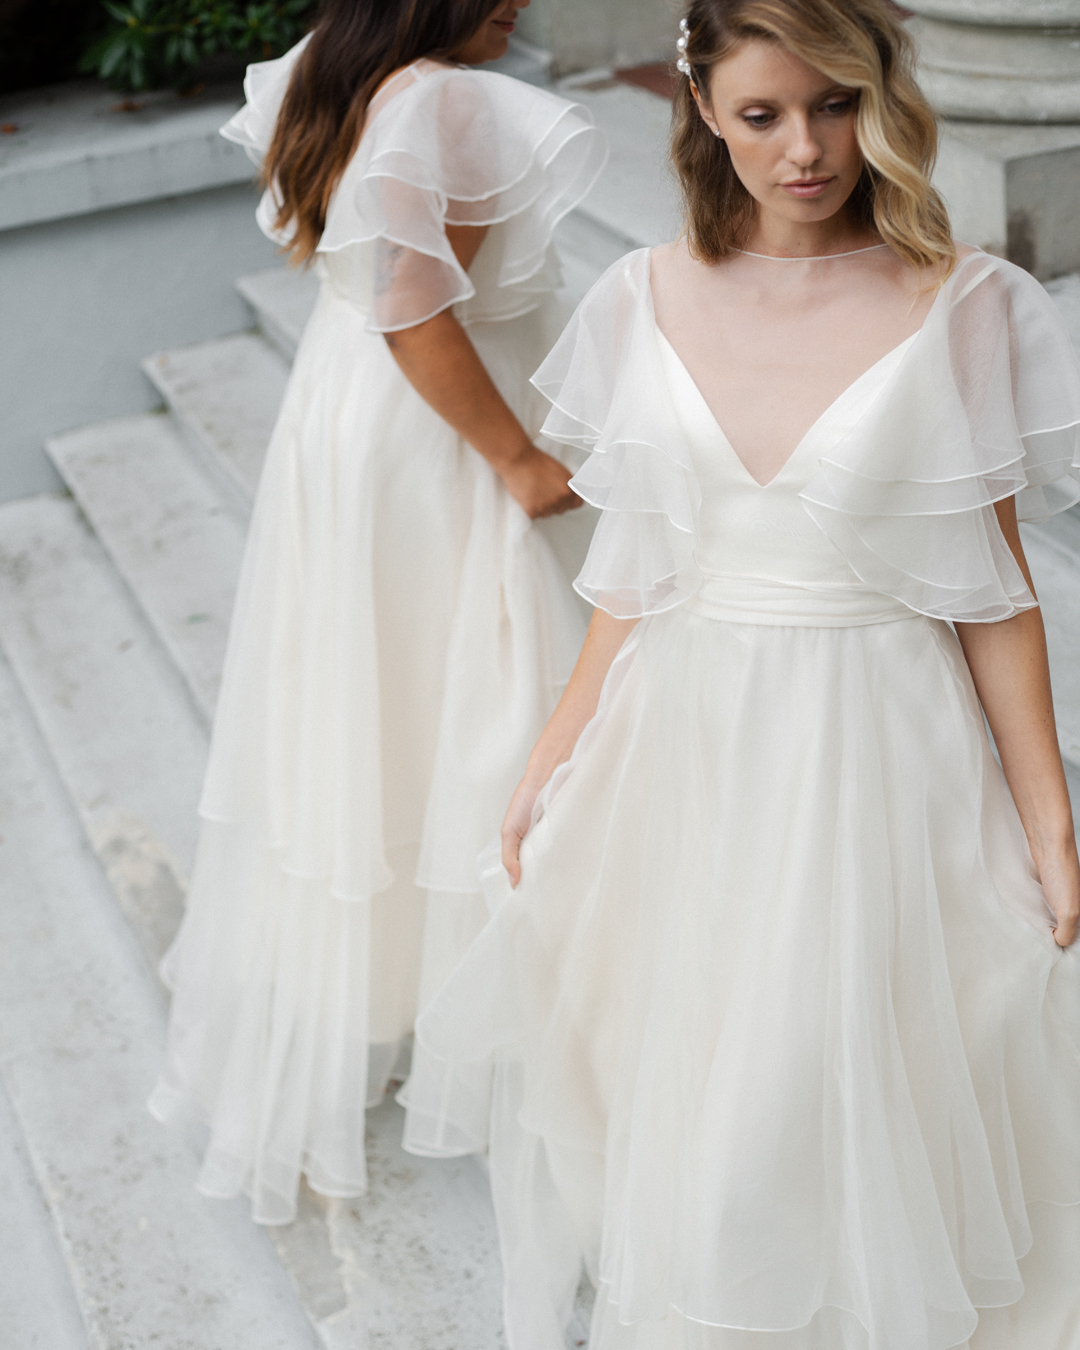 2022 bridal collections from Laudae, Aesling and Truvelle showcase chic silhouettes & size inclusivity | Bridal Gown Design Feature on Brontë Bride